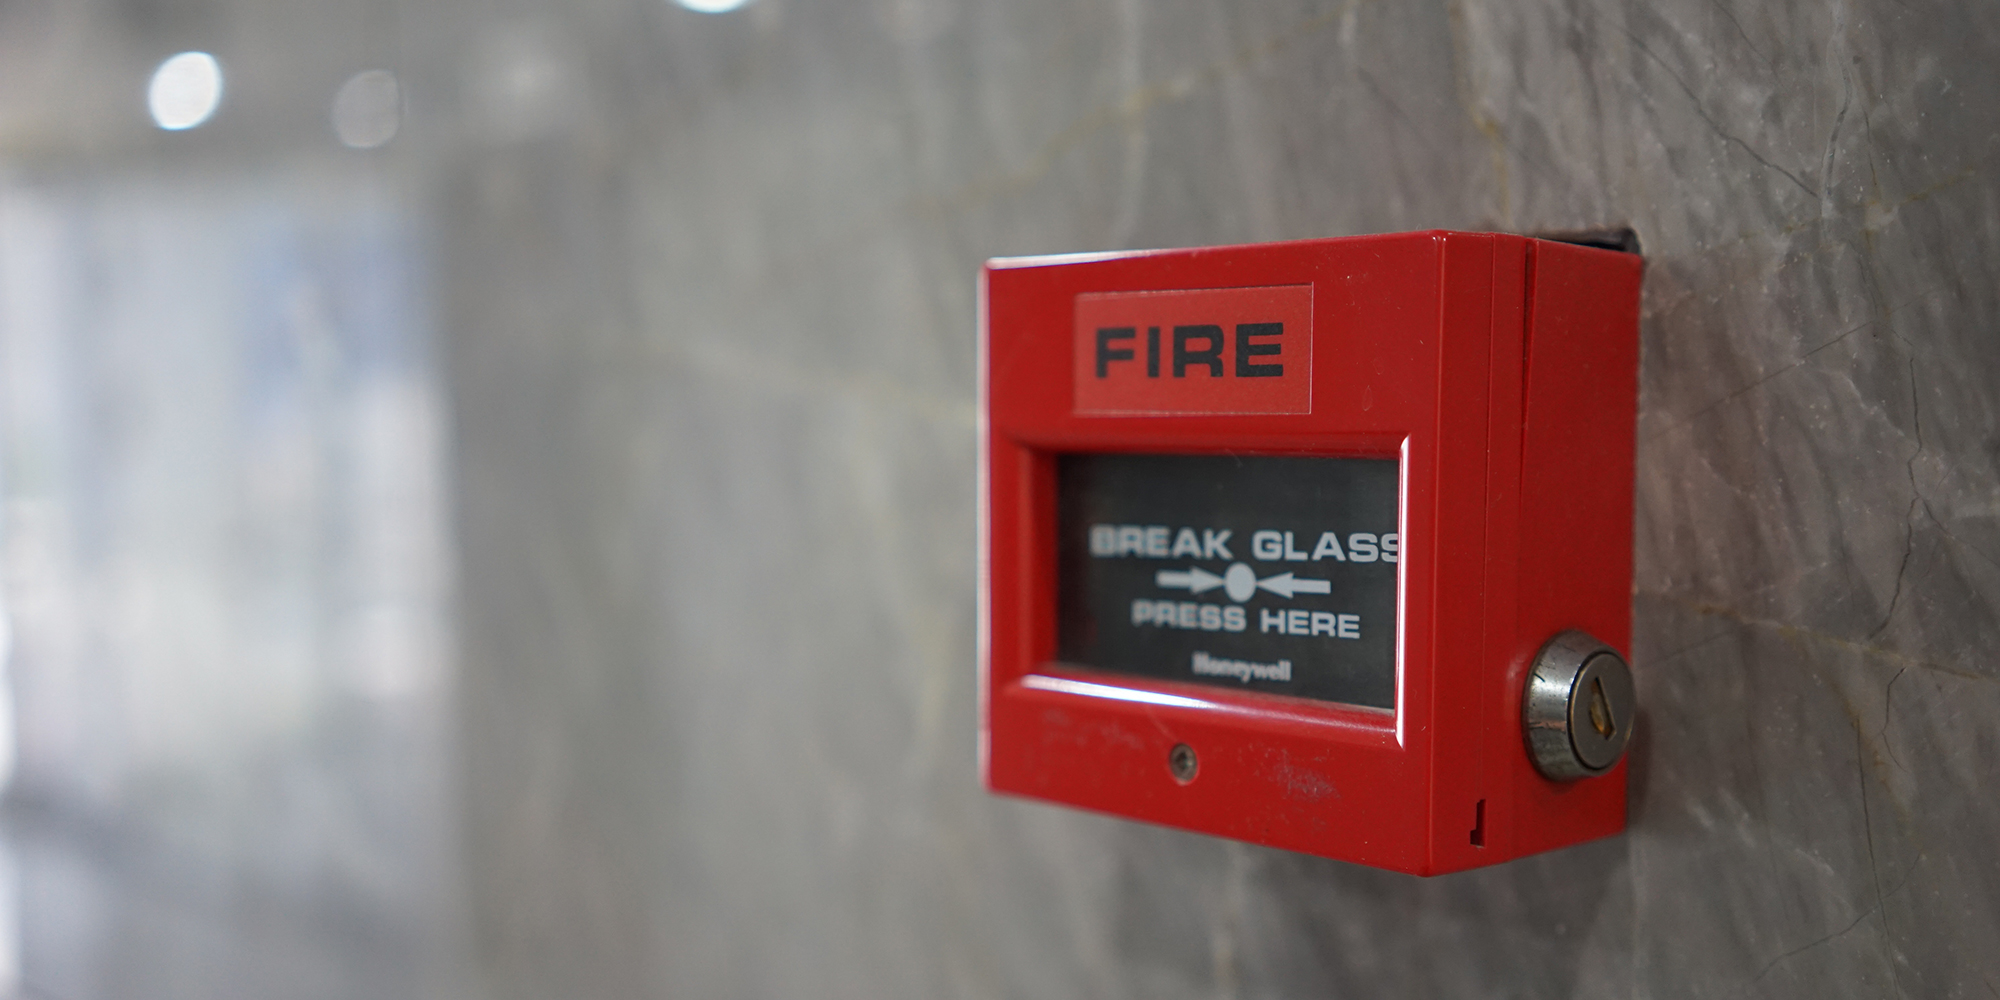  Peace of mind with   Fire Alarm install &amp; Maintenance    Call Now for a quote  